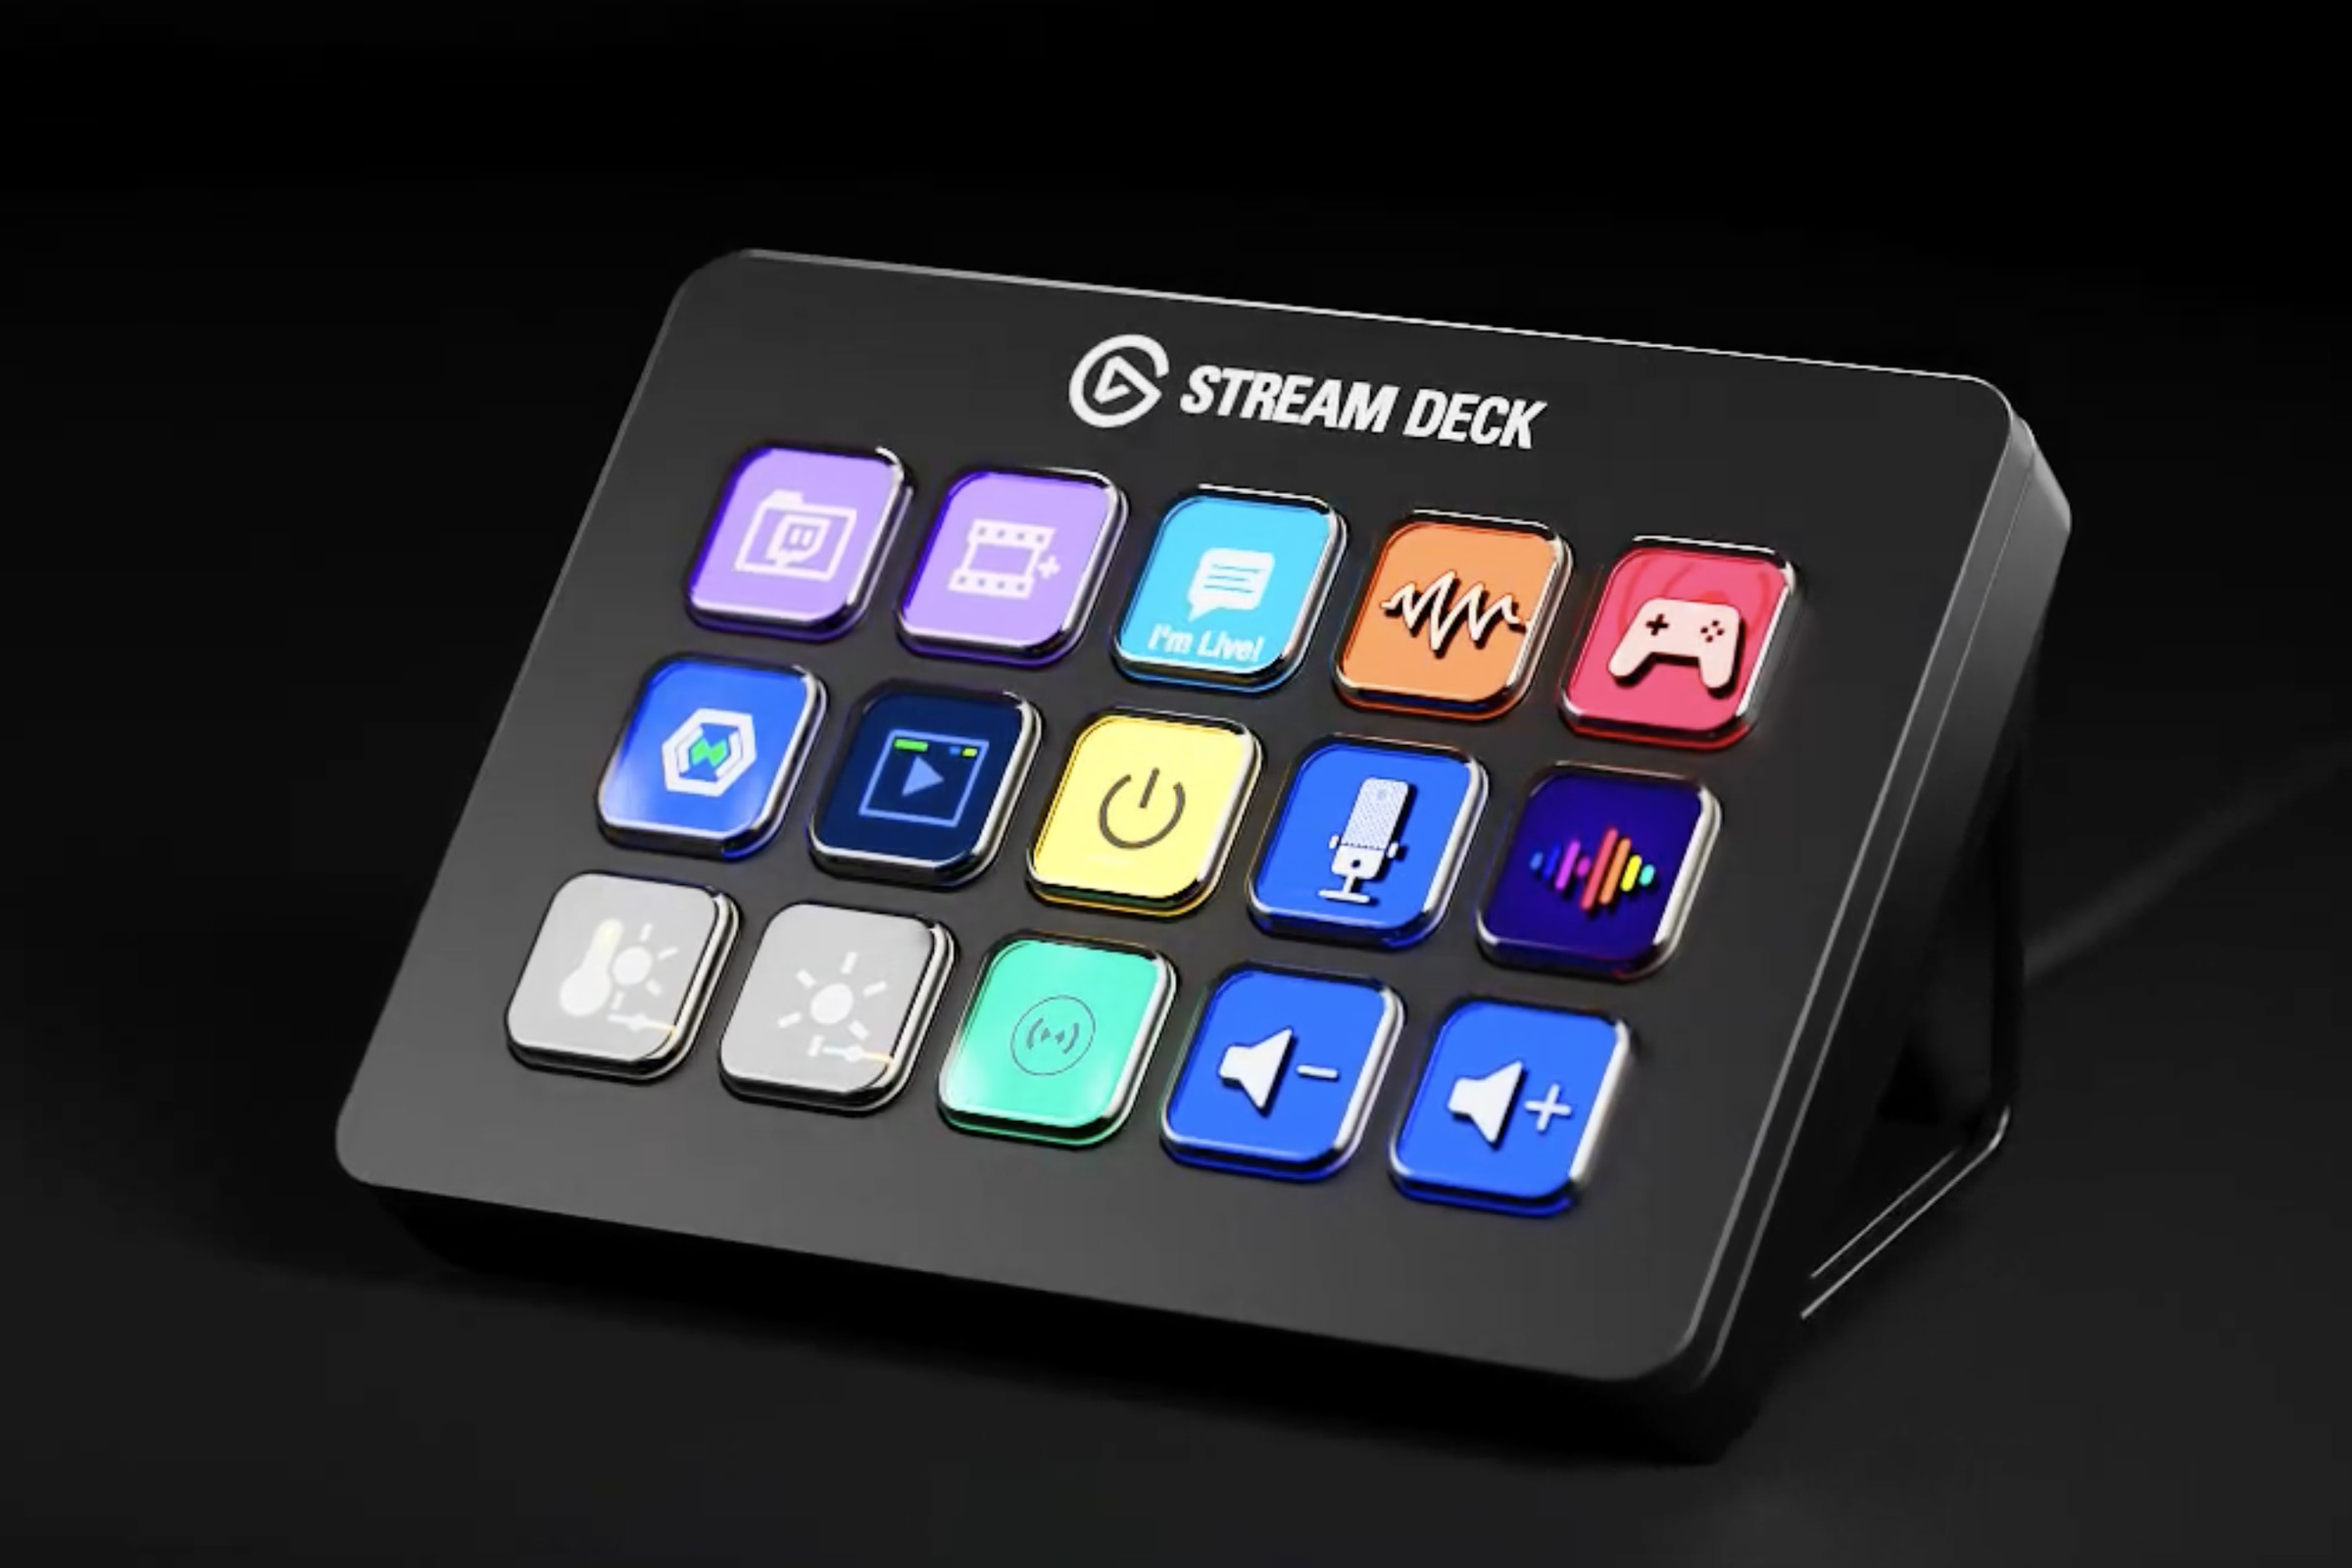 Elgato’s new Stream Deck, which is different from Valve’s Steam Deck.